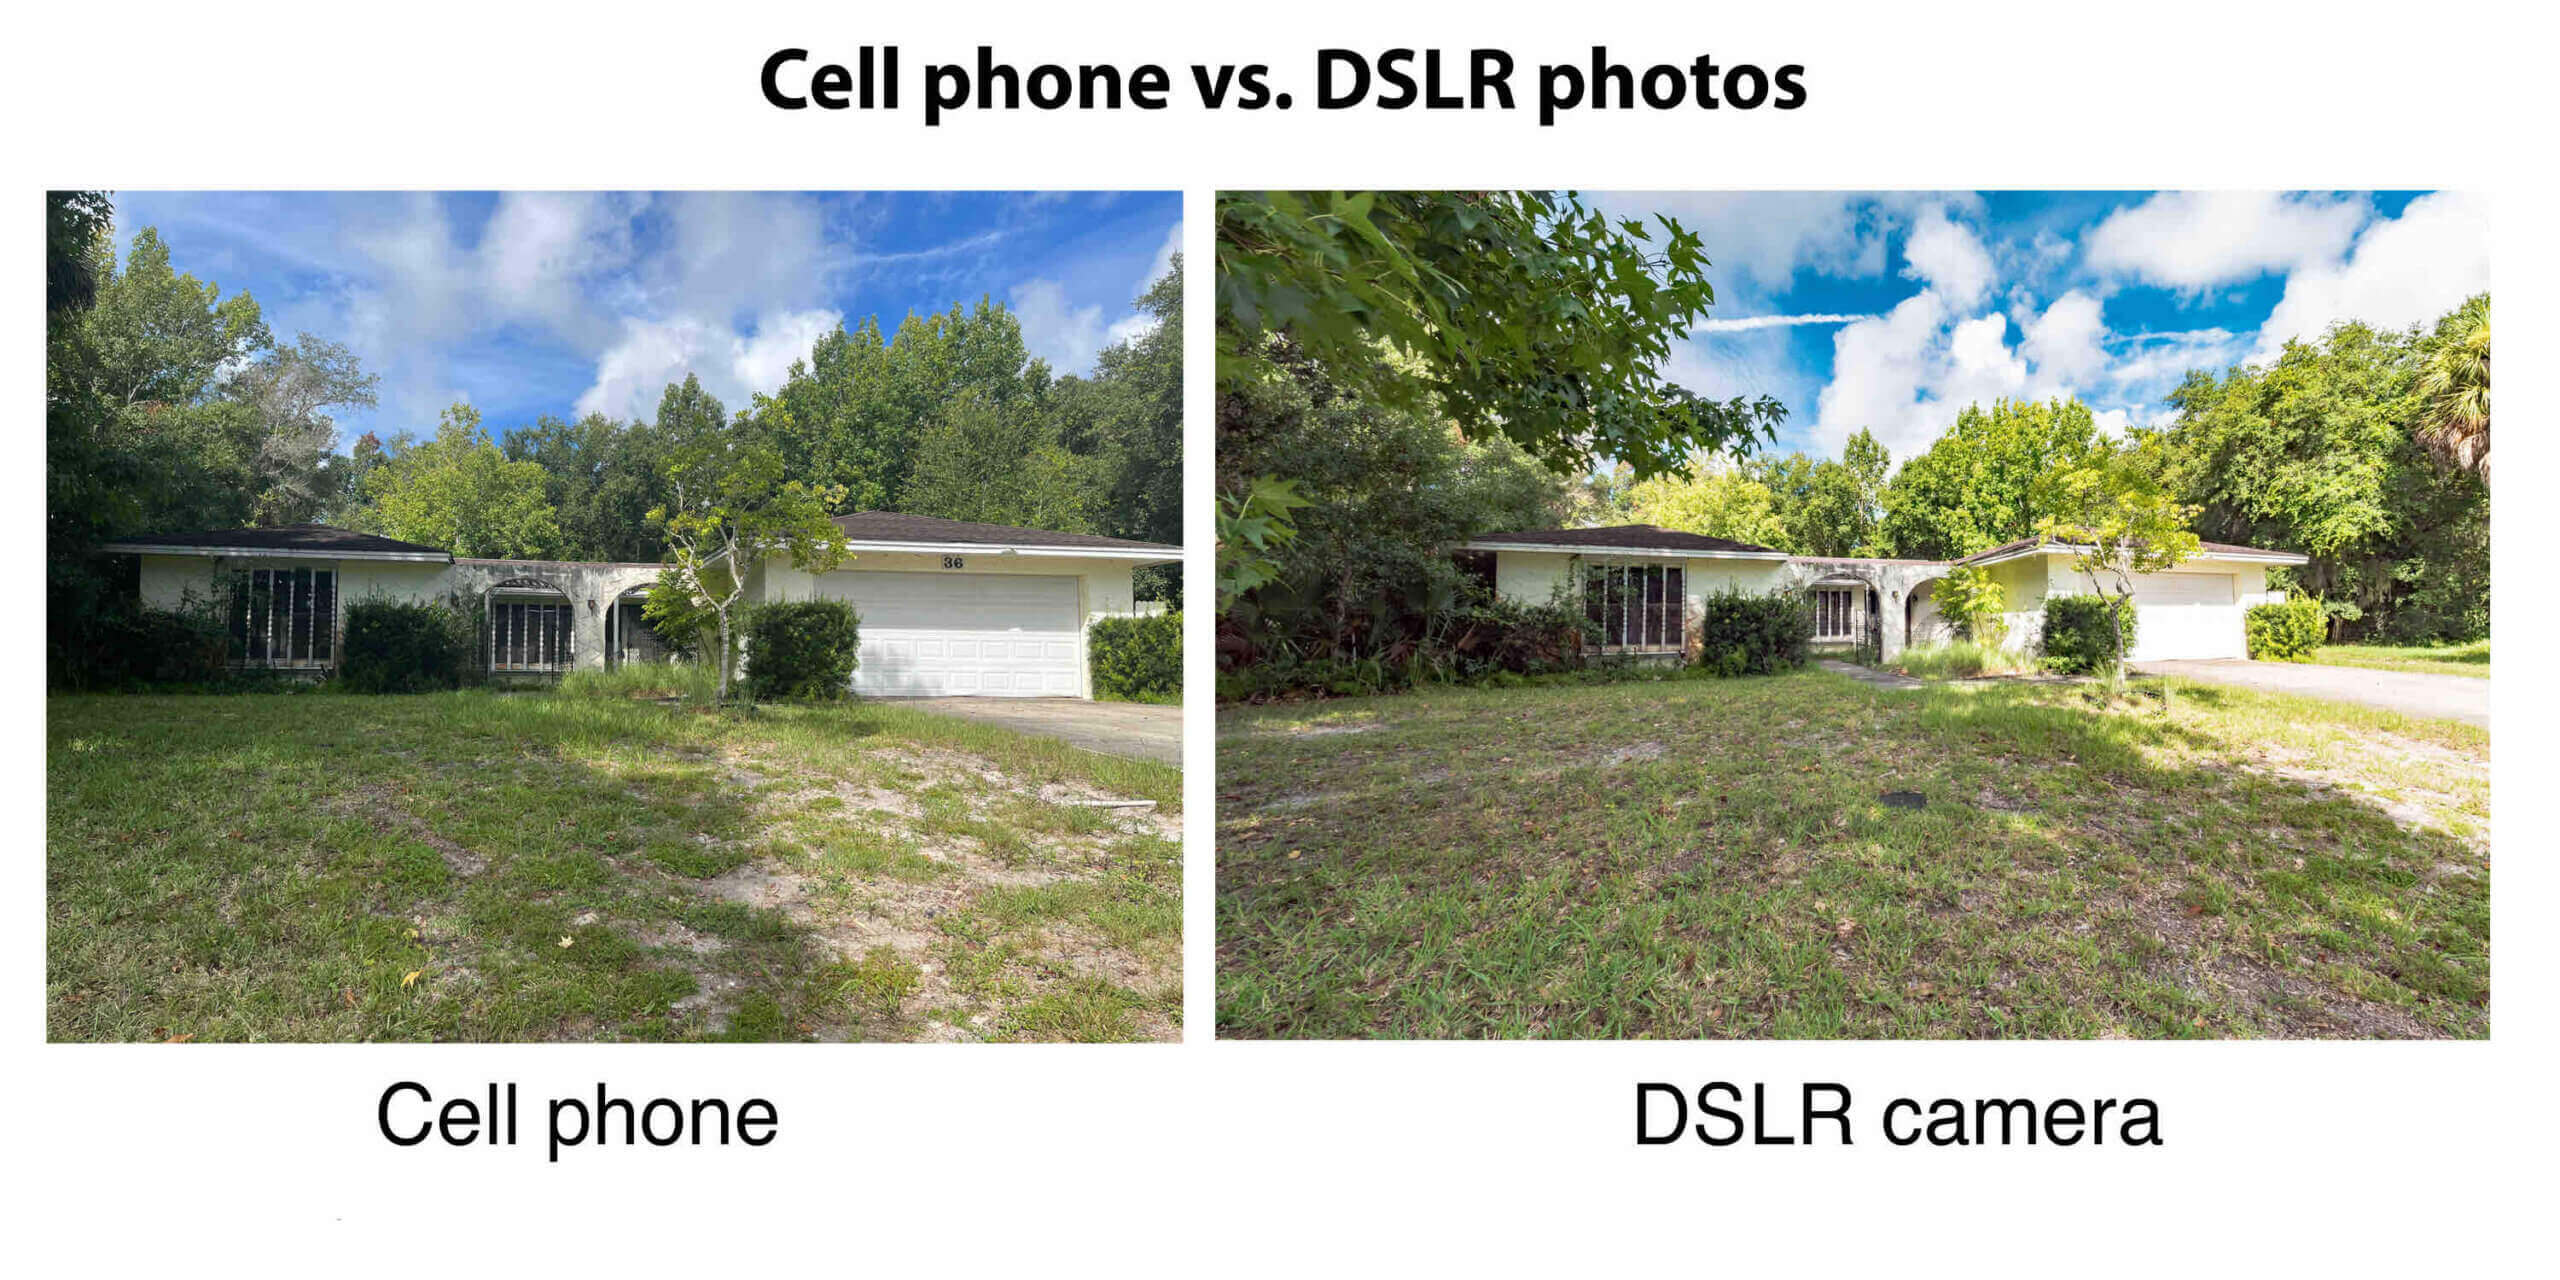 Why are Smartphones Better Than DSLRs?